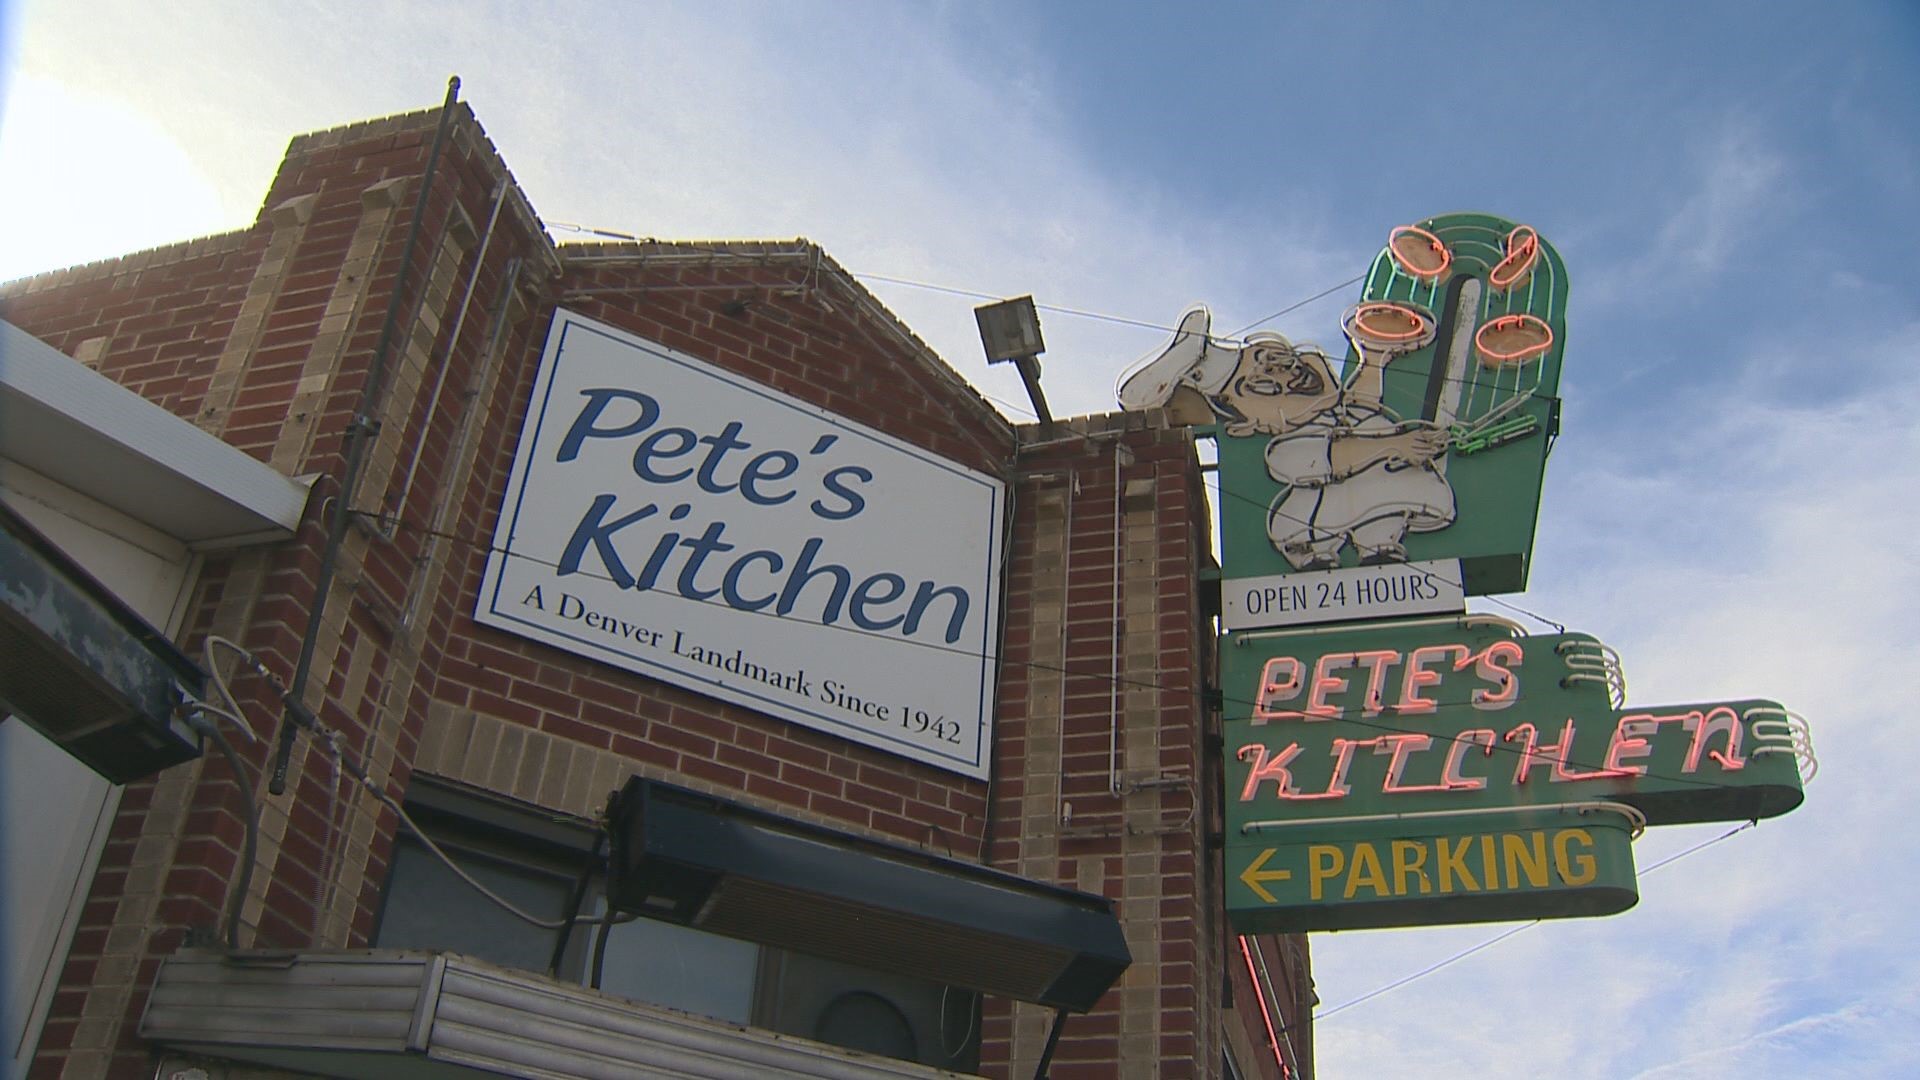 Pete Contos was 85. He and his wife owned Pete's Kitchen and 5 other Denver restaurants.